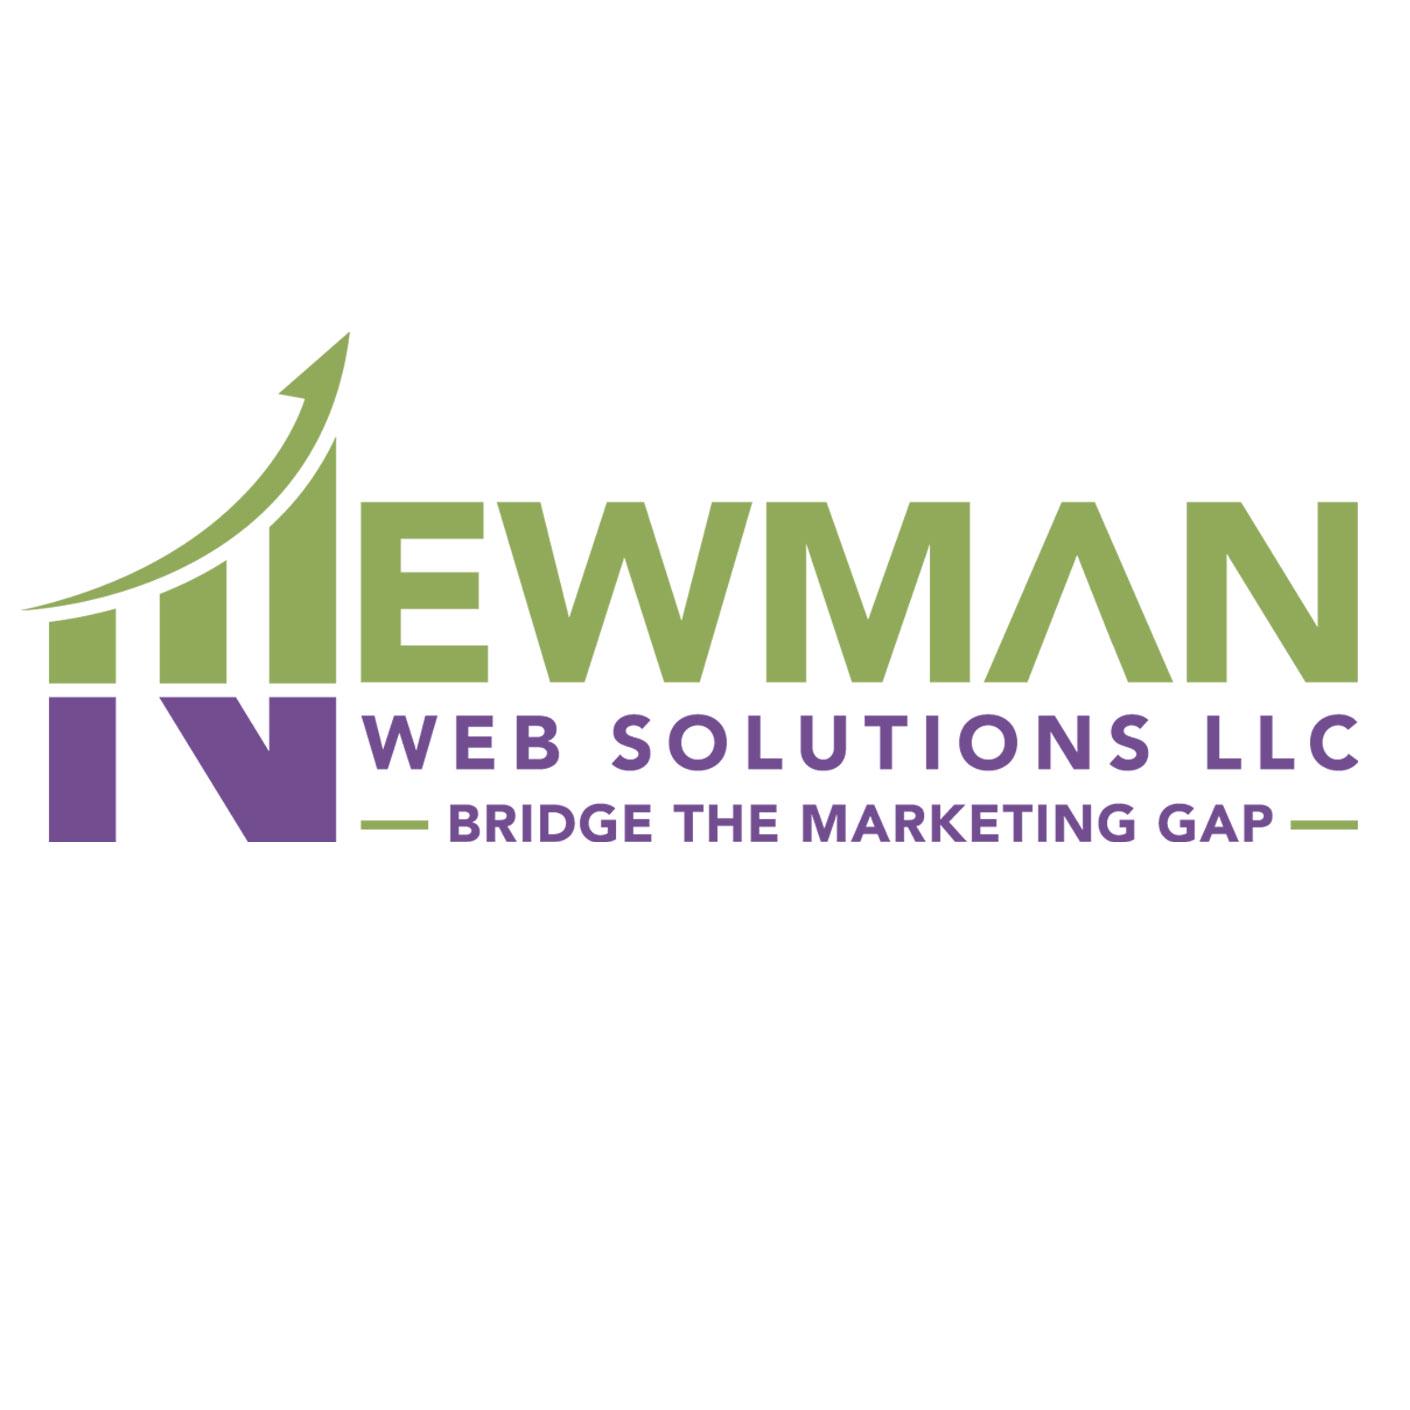 Newman Web Solutions profile on Qualified.One